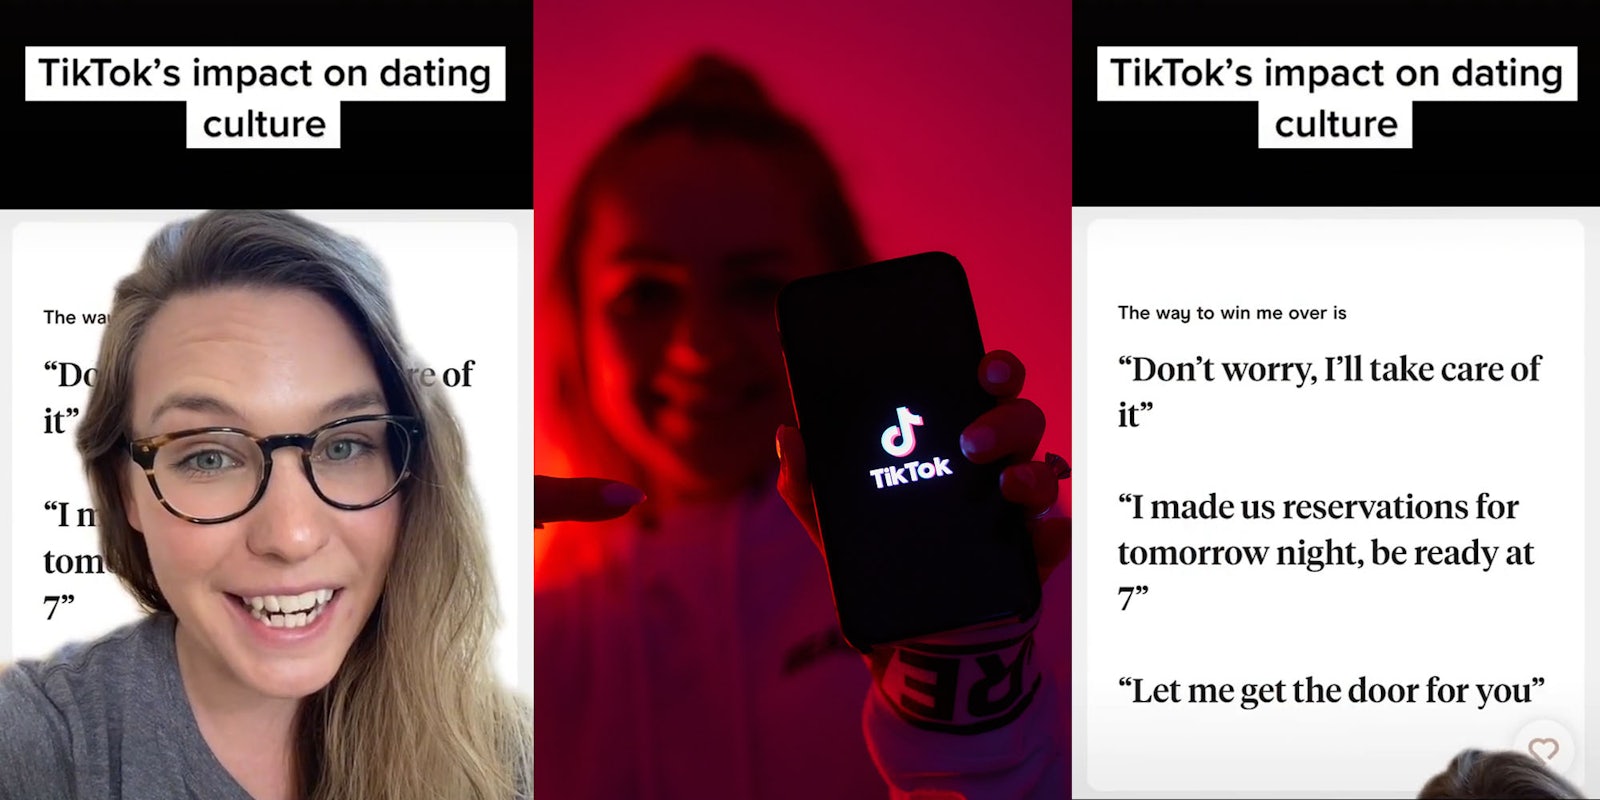 Woman greenscreen tiktok over quotes caption 'TikTok's impact on dating culture' (l) woman holding phone with tiktok app on screen red lights behind (c) woman greenscreen tiktok over quotes caption 'TikTok's impact on dating culture' quotes 'The way to win me over is 'Don't worry, I'll take care of it' 'I made us reservations for tomorrow night, be ready at 7' 'Let me get the door for you'' (r)